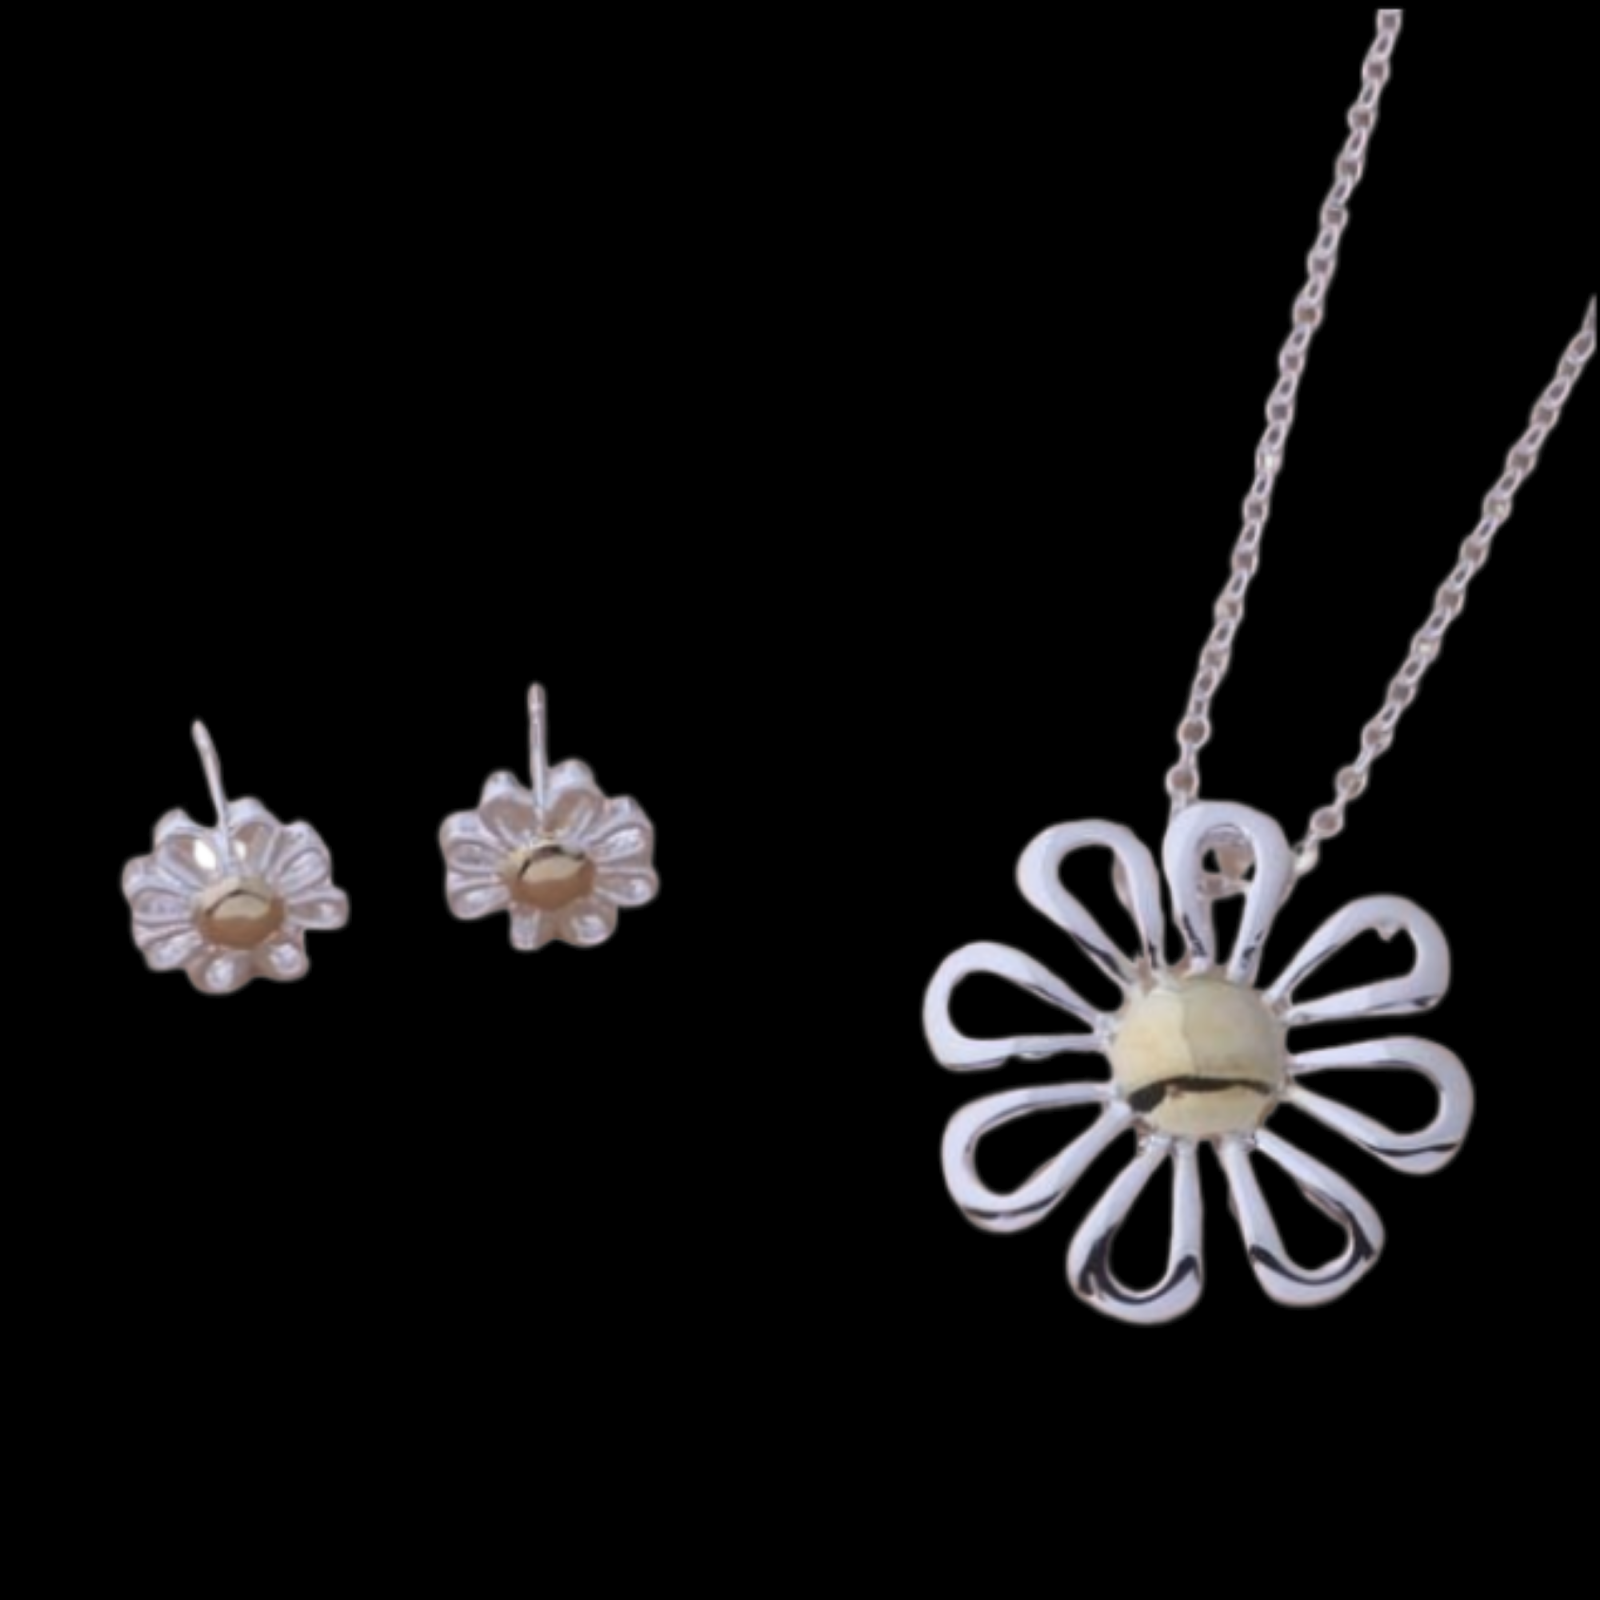 Daisy Pendant Necklace and Earrings Set Sterling Silver NEW